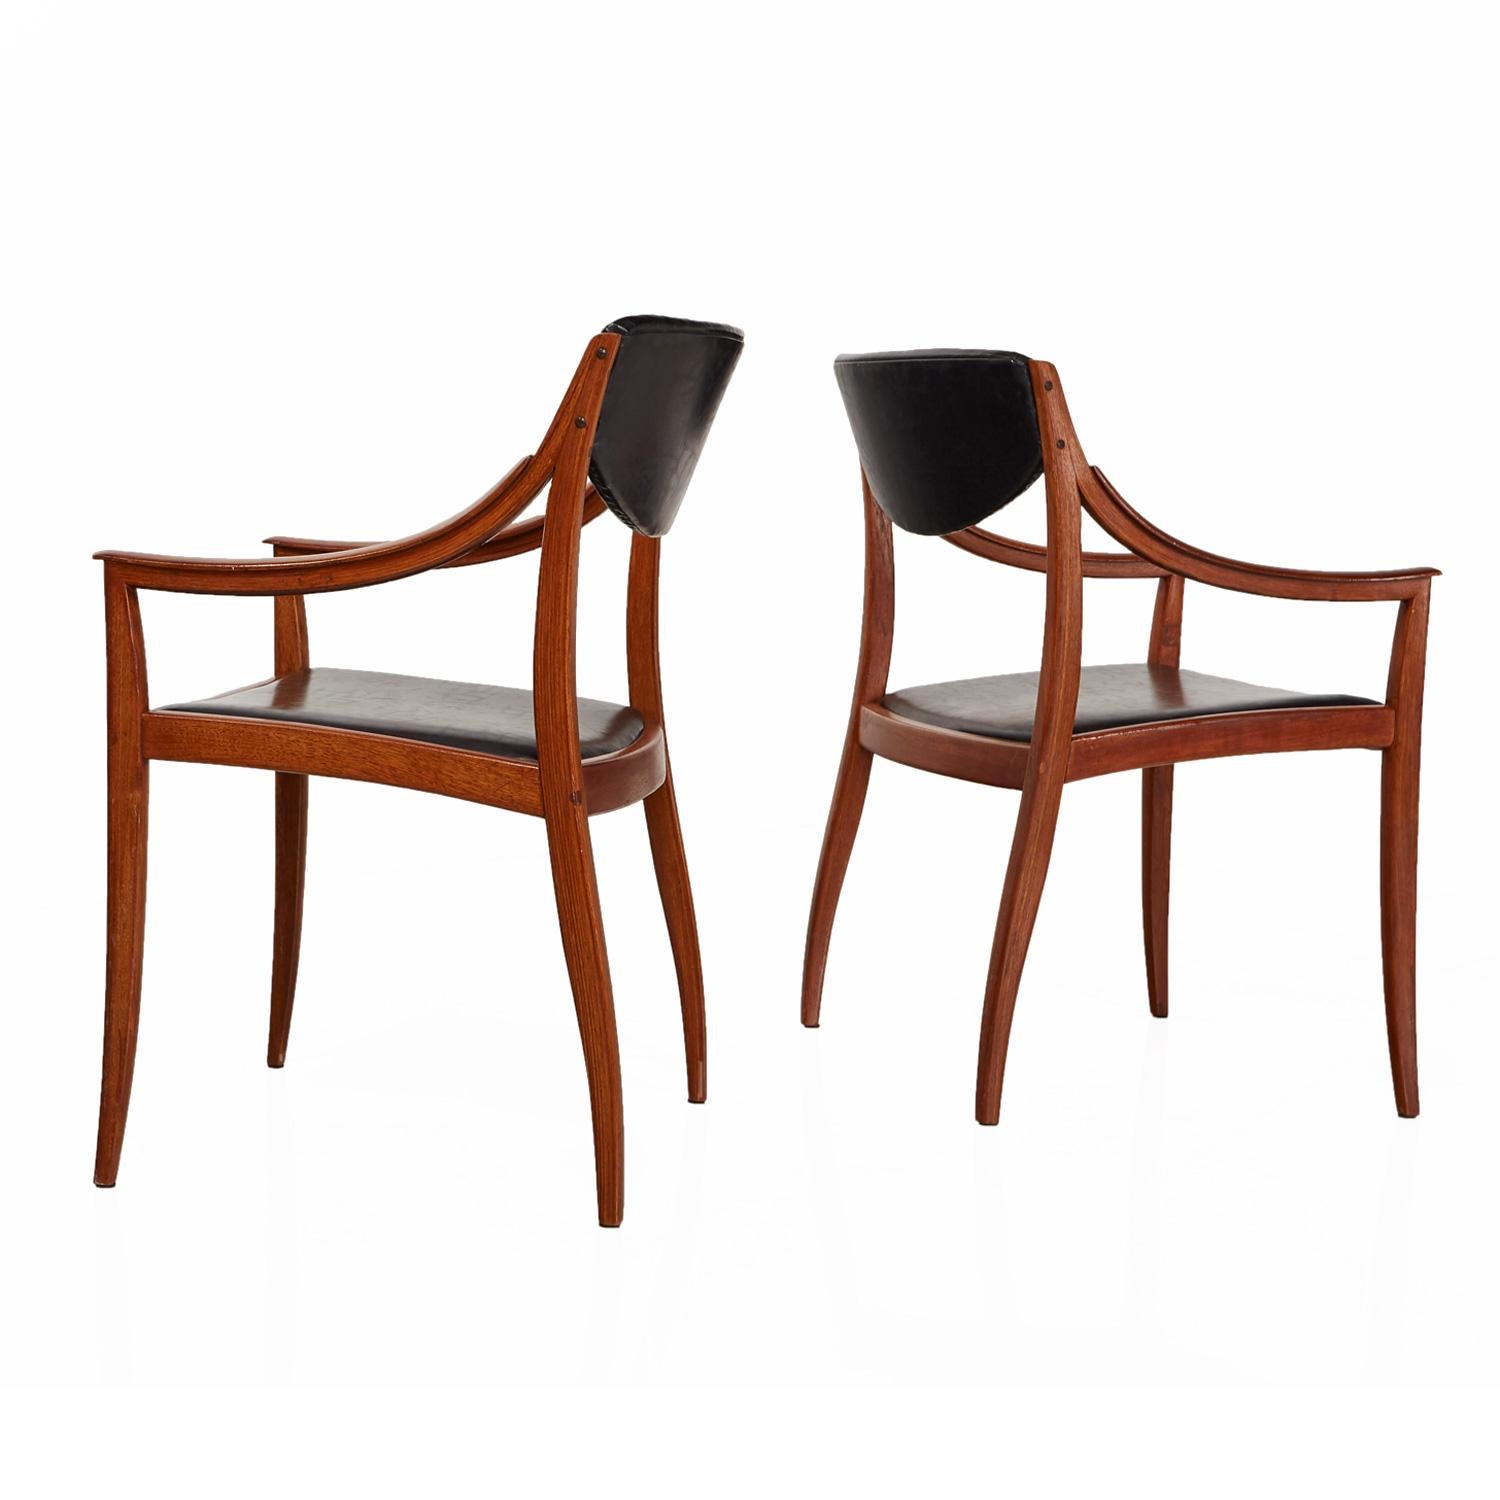 Sex of (six) Drexel parallel dining chairs. Uncommon bentwood design. Excellent condition vinyl upholstery. Group consists of four armless side chairs and two chairs with arms. Note the gentle sloping swag contour in the arms. Minimalistic, yet